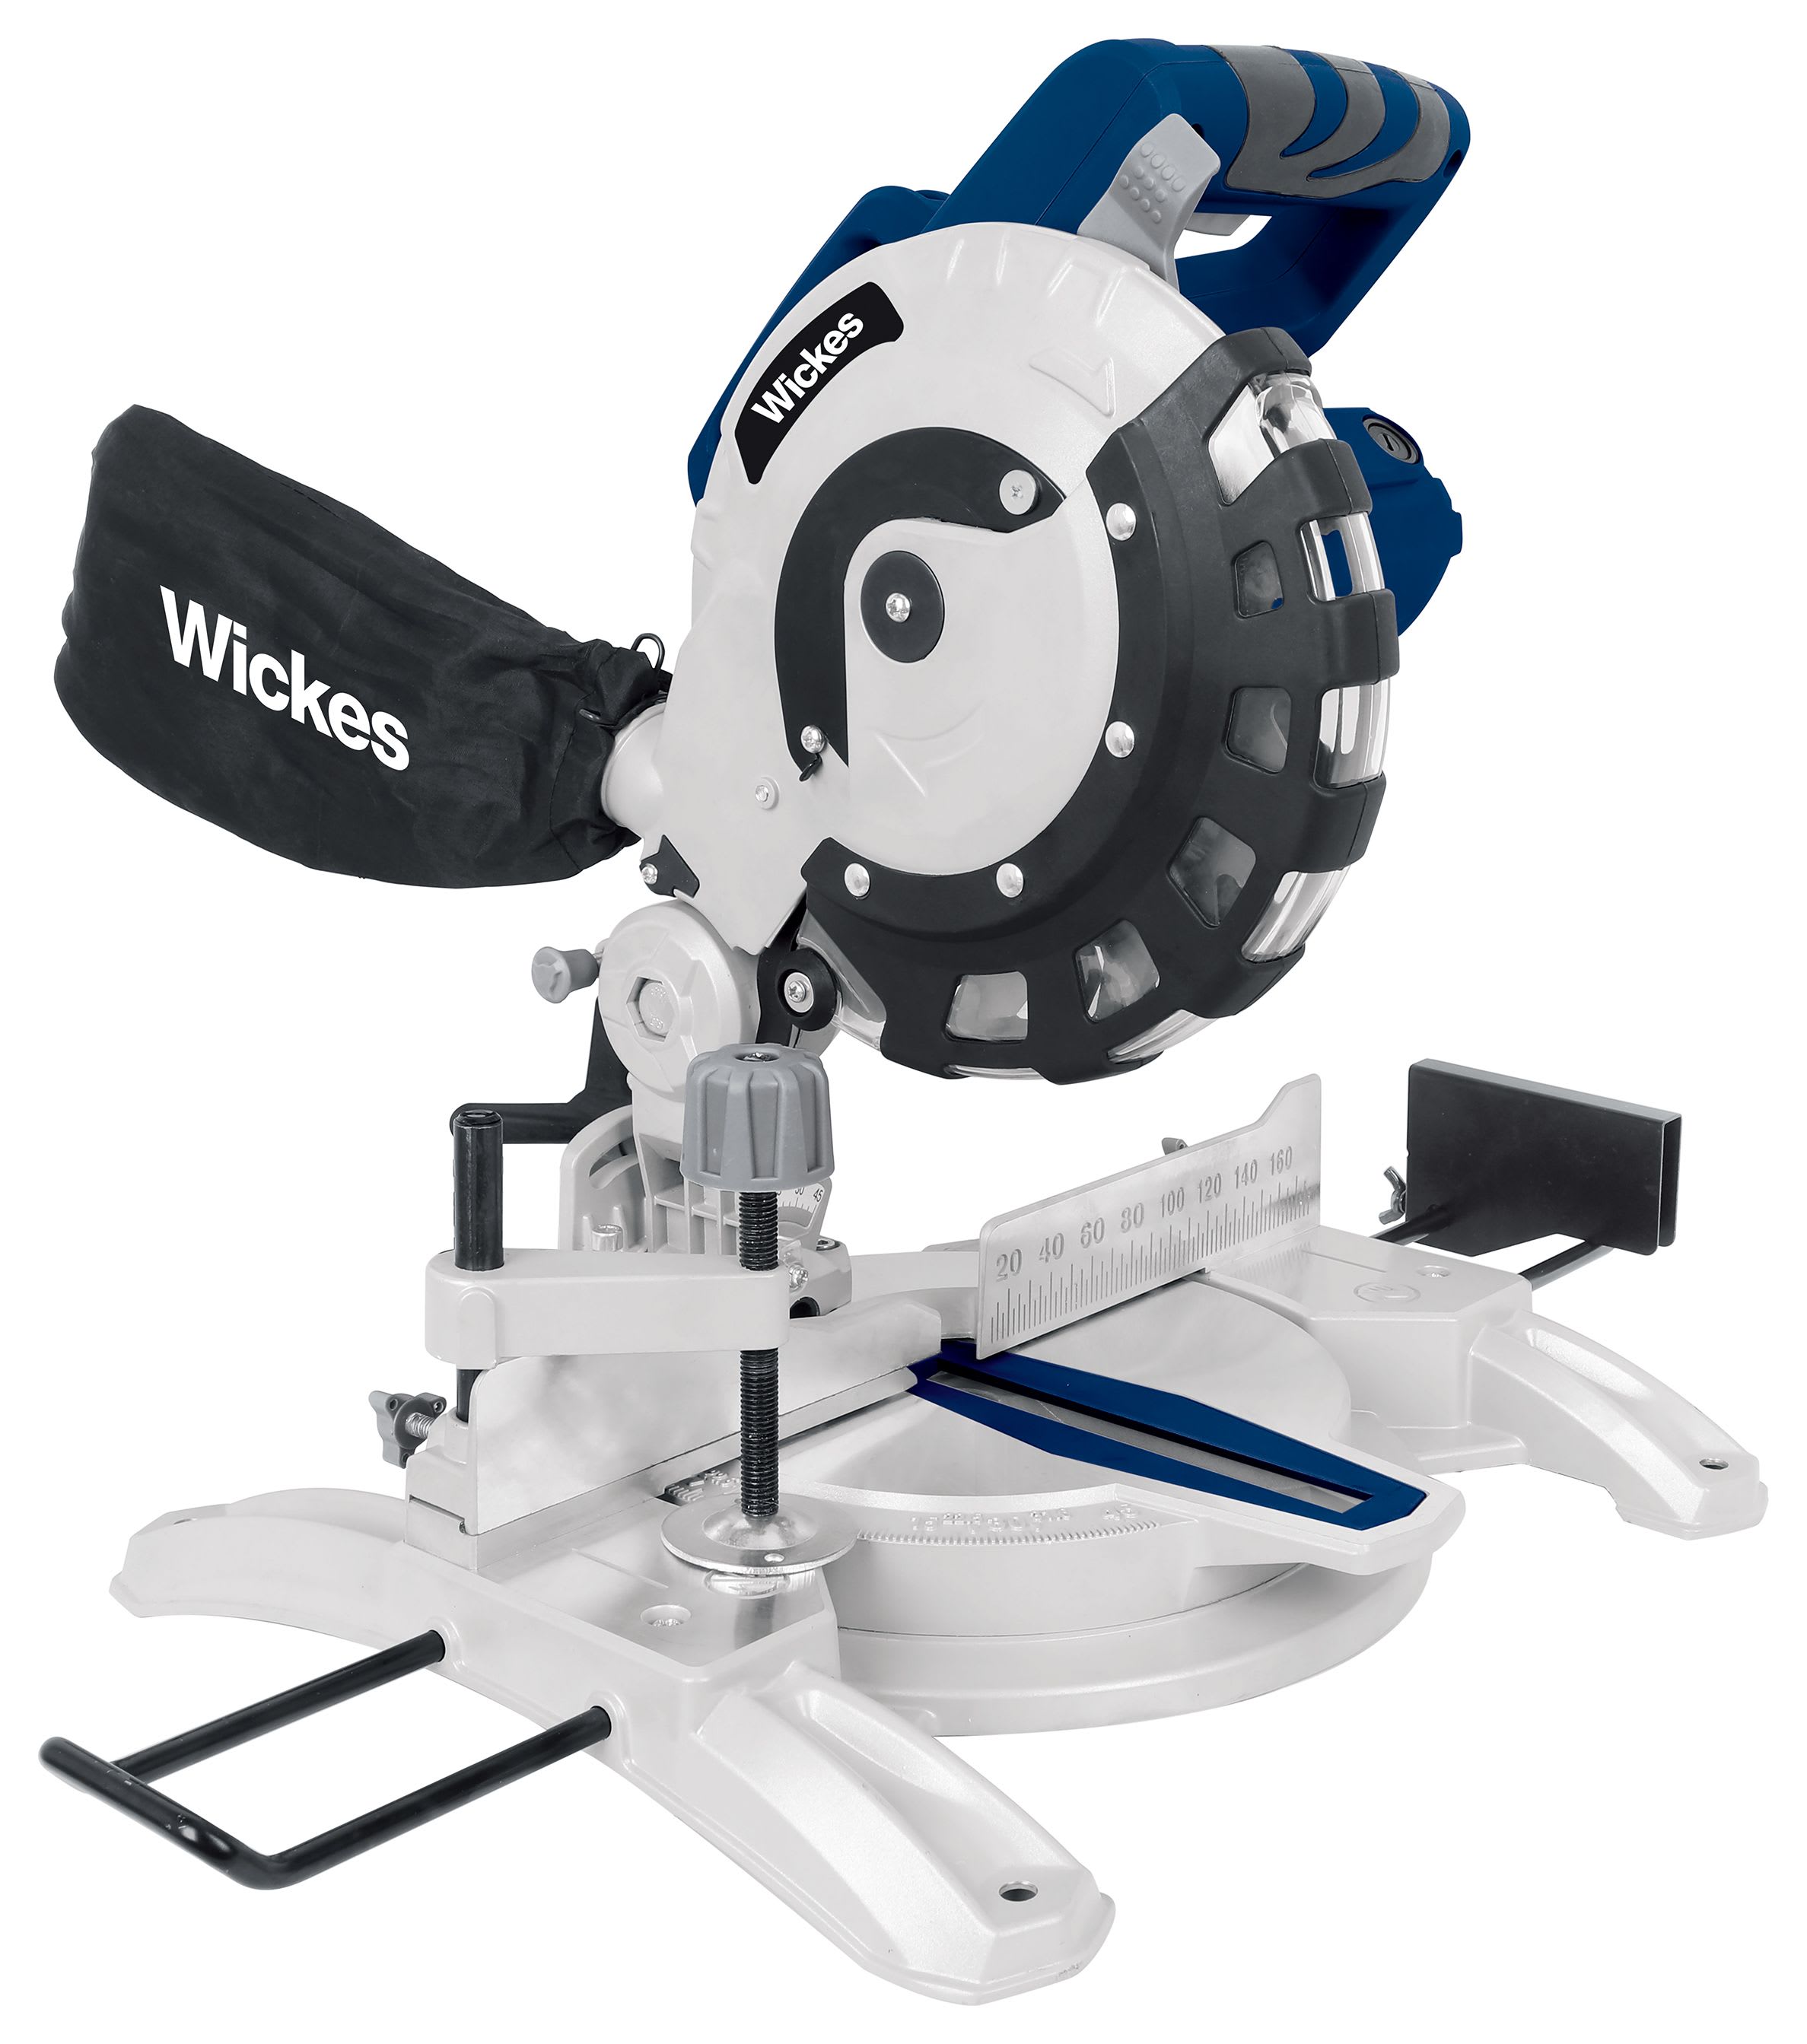 Wickes 210mm Corded Compound Mitre Saw - 1800W